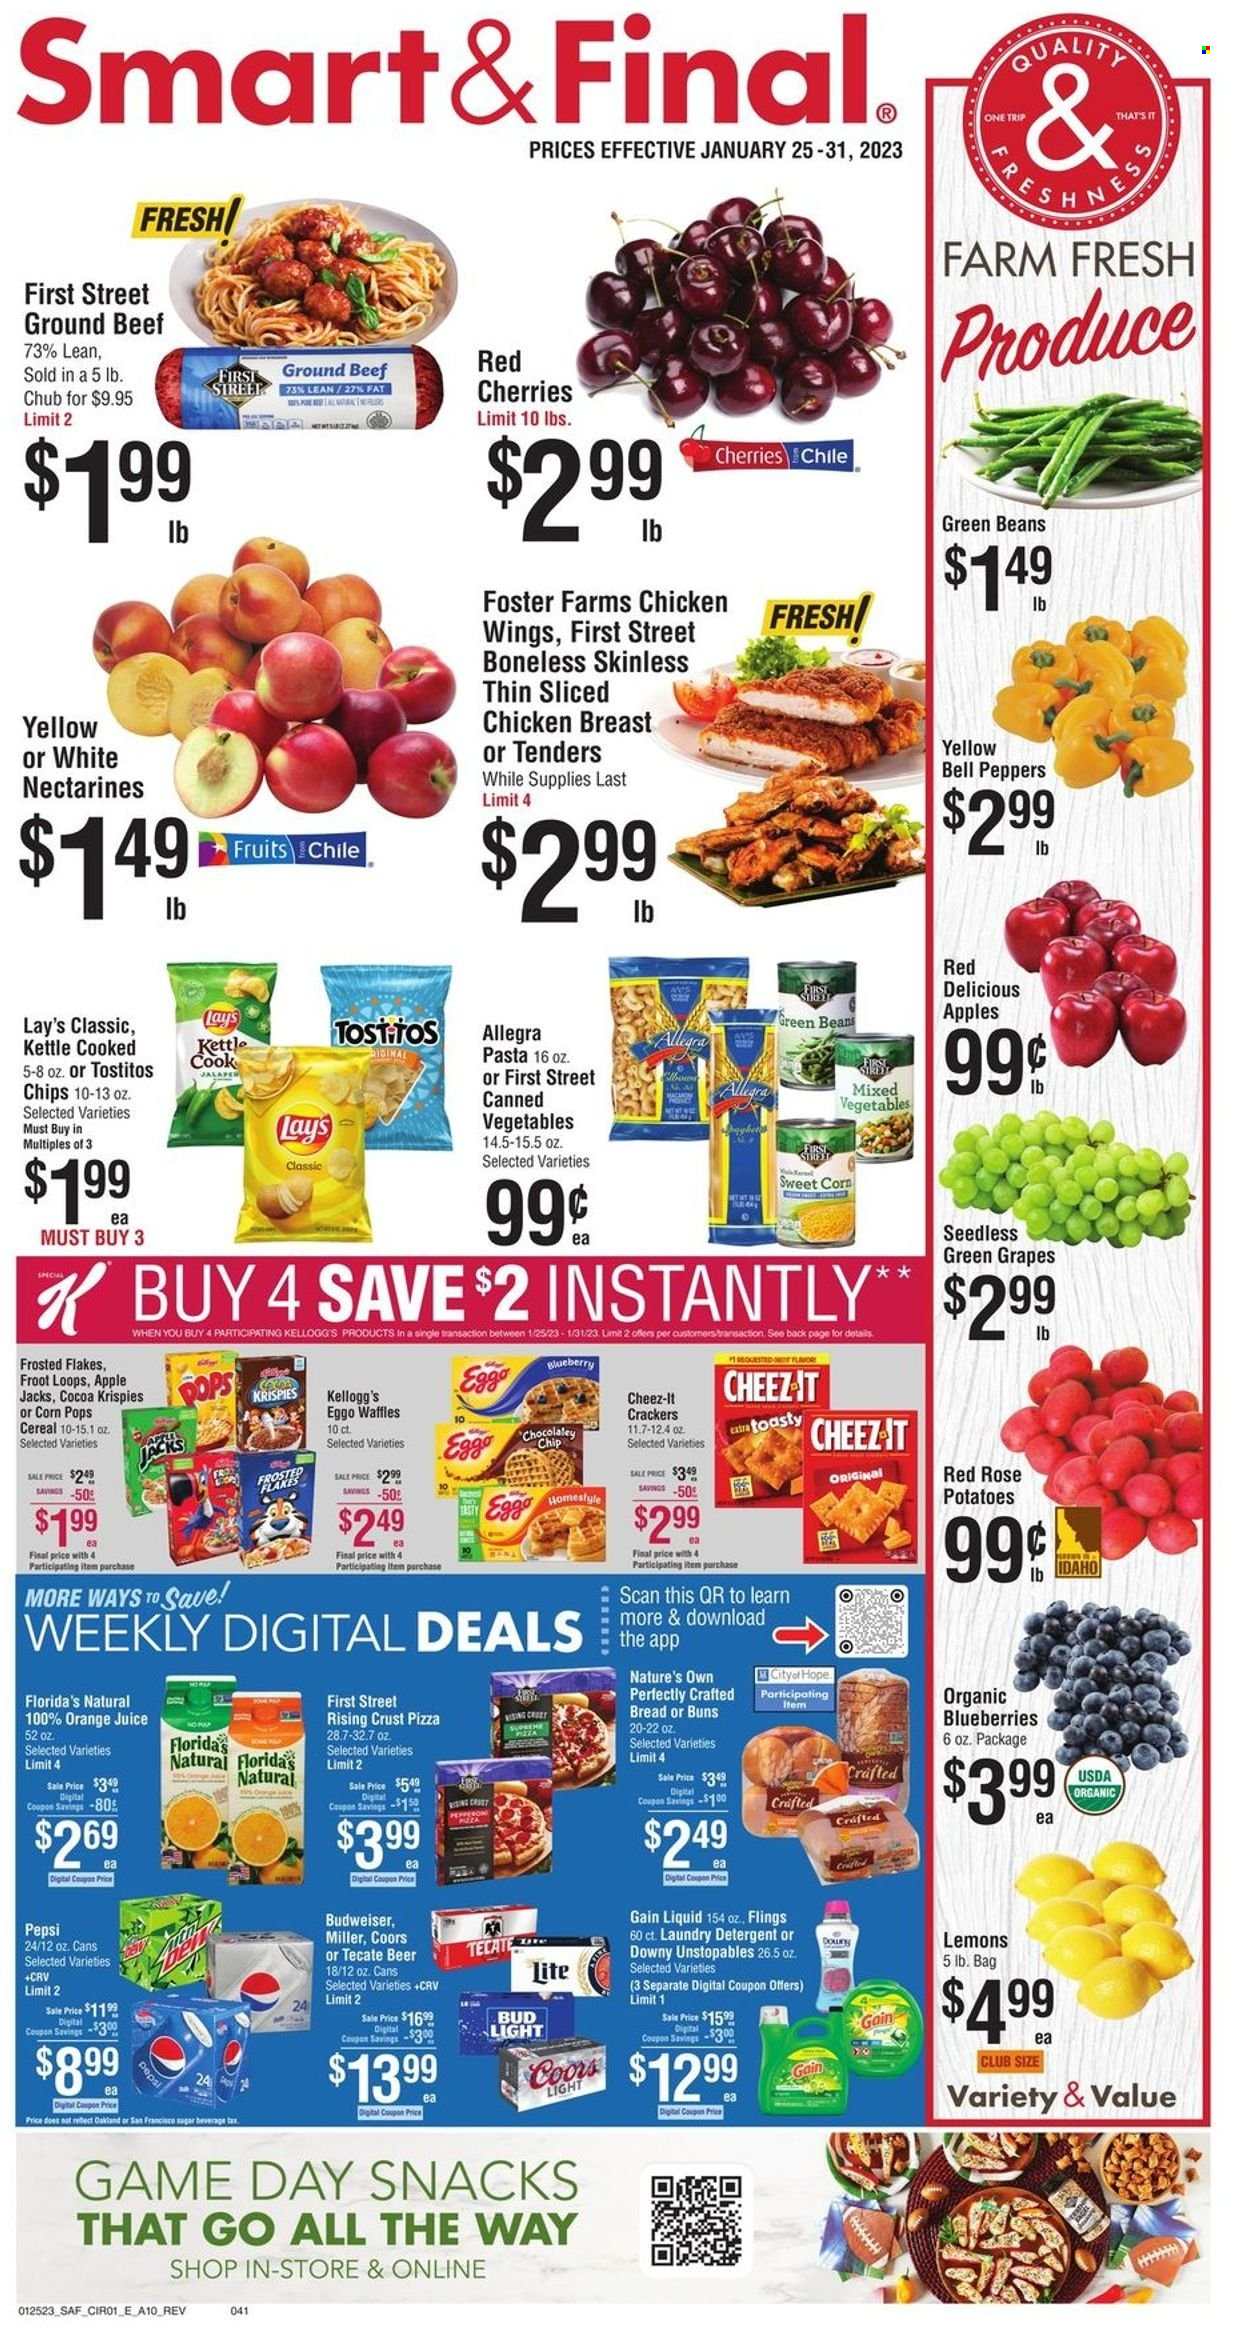 thumbnail - Smart & Final Flyer - 01/25/2023 - 01/31/2023 - Sales products - bread, buns, waffles, beans, bell peppers, green beans, potatoes, peppers, sweet corn, apples, blueberries, grapes, Red Delicious apples, pizza, pasta, mixed vegetables, chicken wings, crackers, Kellogg's, Florida's Natural, chips, Lay’s, Cheez-It, Tostitos, cocoa, sugar, canned vegetables, cereals, Frosted Flakes, Corn Pops, Pepsi, orange juice, juice, wine, beer, Bud Light, Miller, chicken breasts, beef meat, ground beef, Gain, Unstopables, laundry detergent, Budweiser, nectarines, Coors, lemons. Page 1.